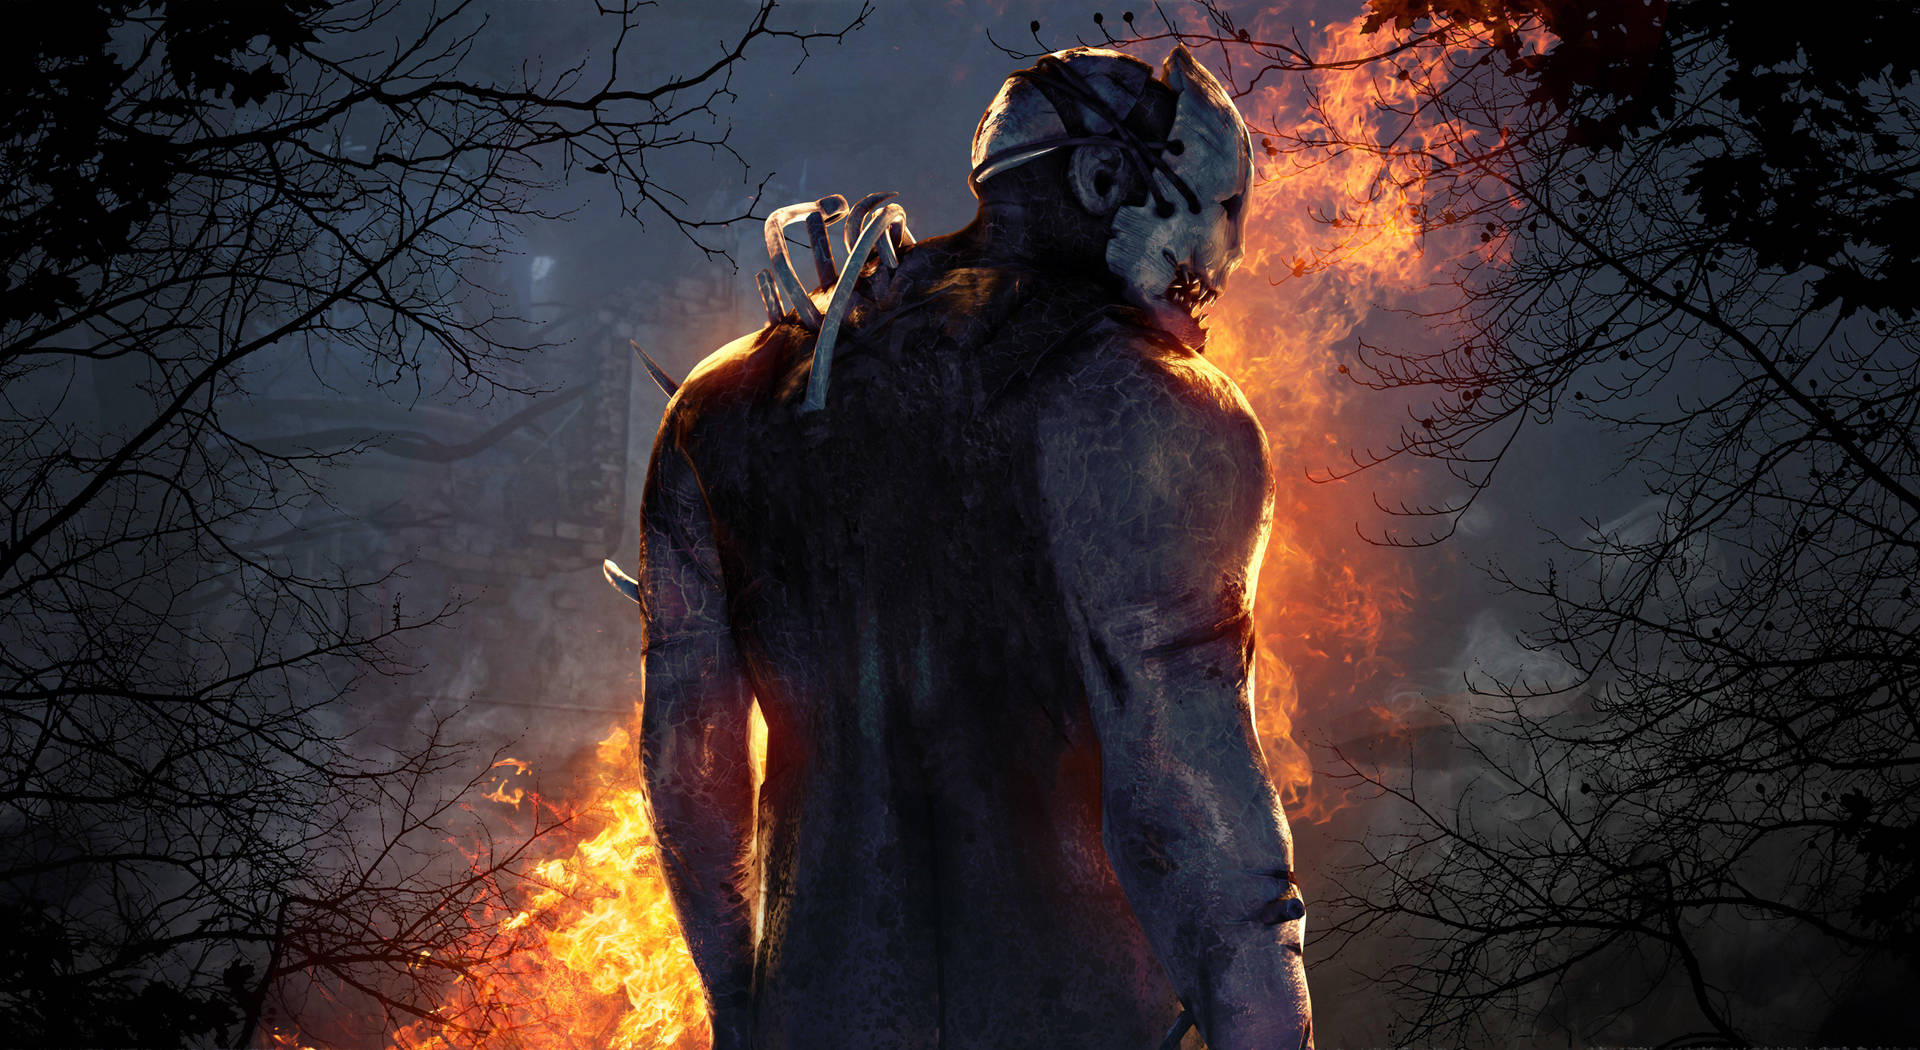 Dead By Daylight The Trapper On Fire Background